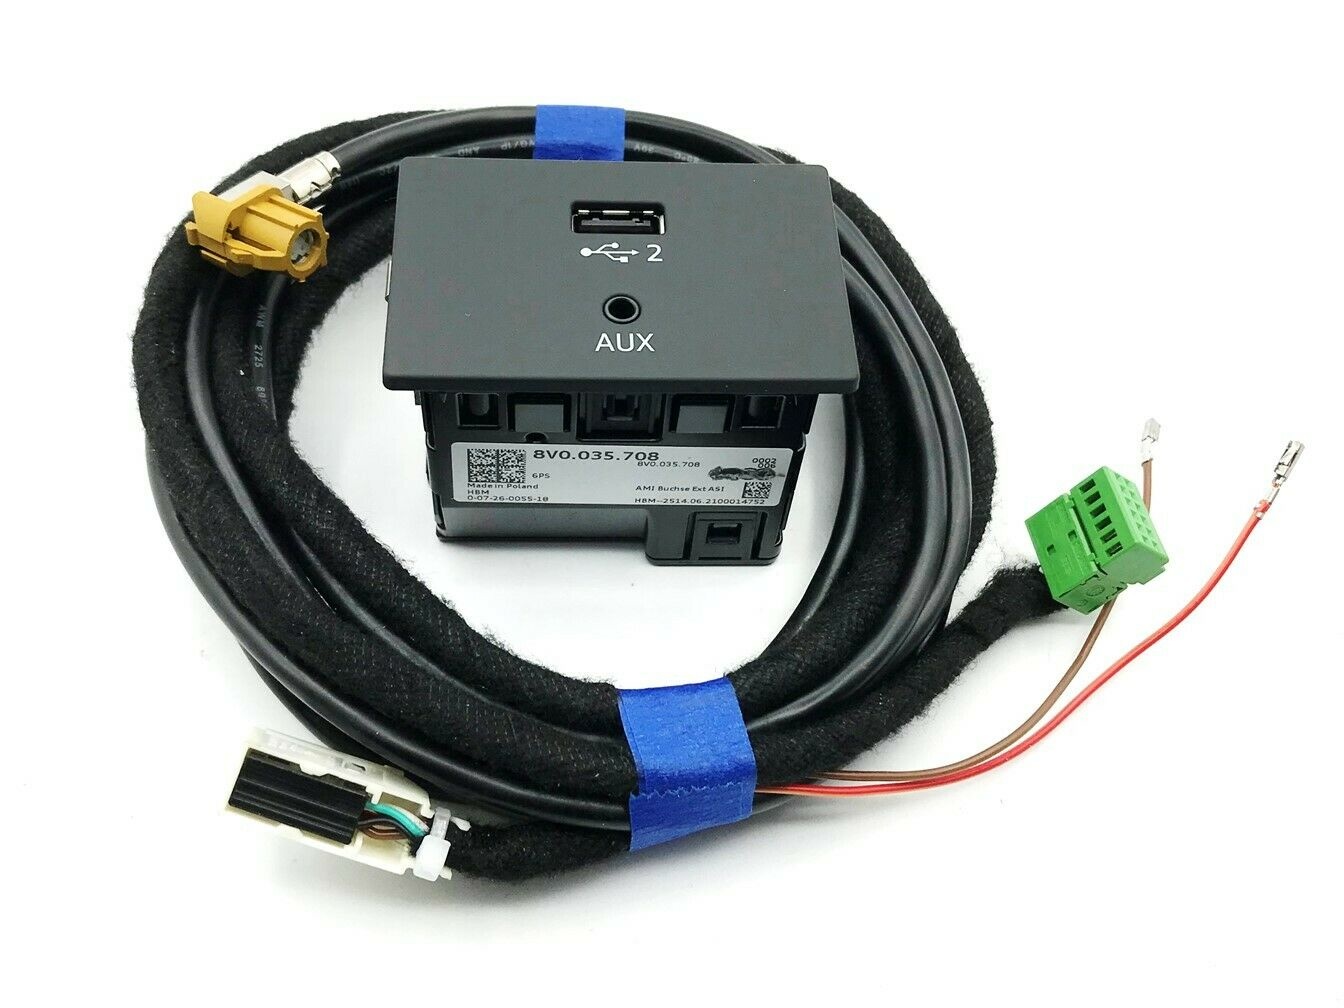 At blokere Inhibere Betydning USB - AUX connection cable for AUDI MIB radios and navigation A3 - Car  Gadgets BV